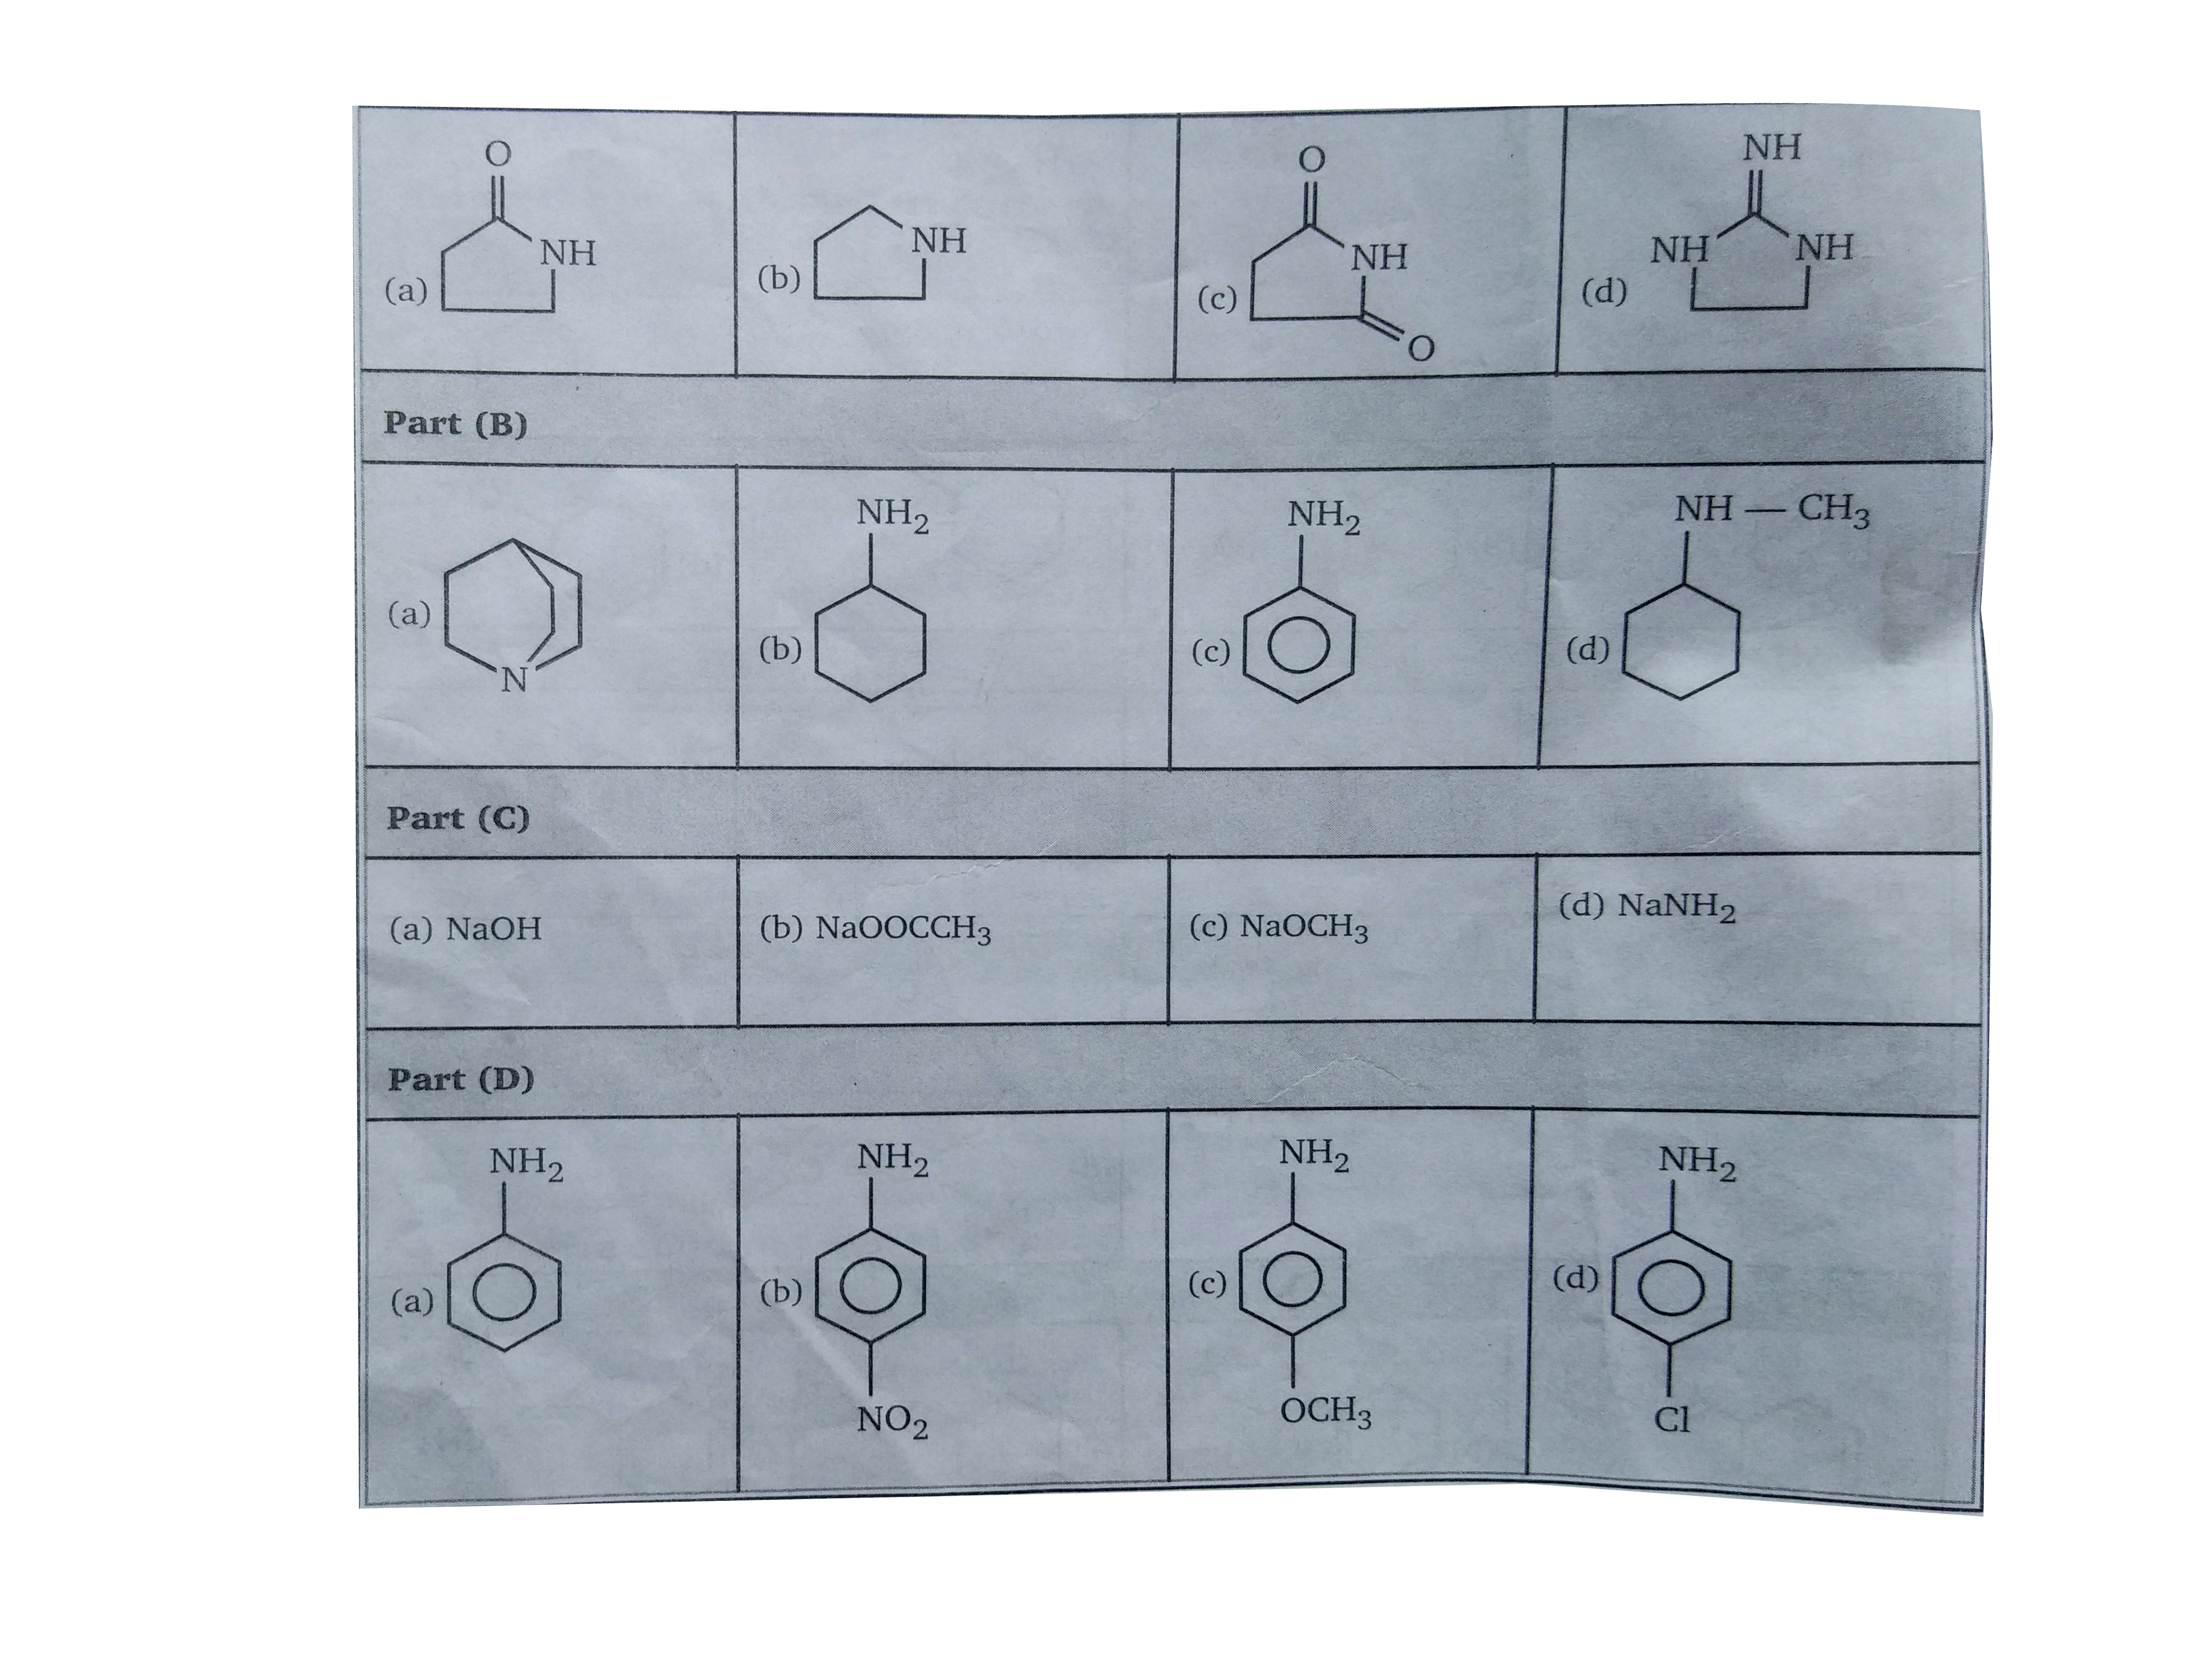 Identify the most basic compound in the following.